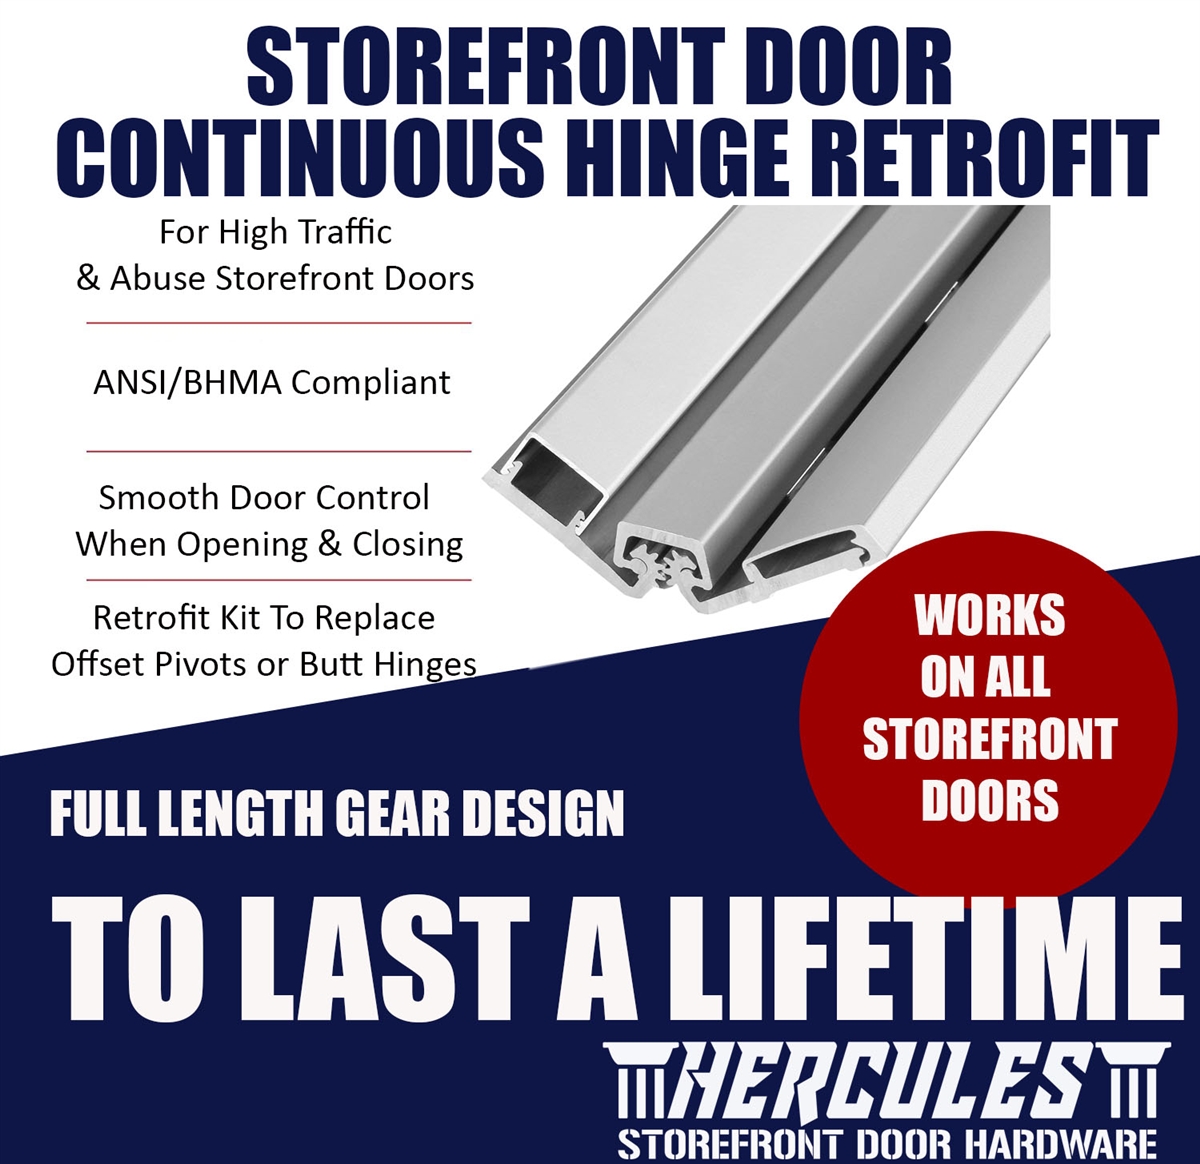 How To Replace A Storefront Door Hinge